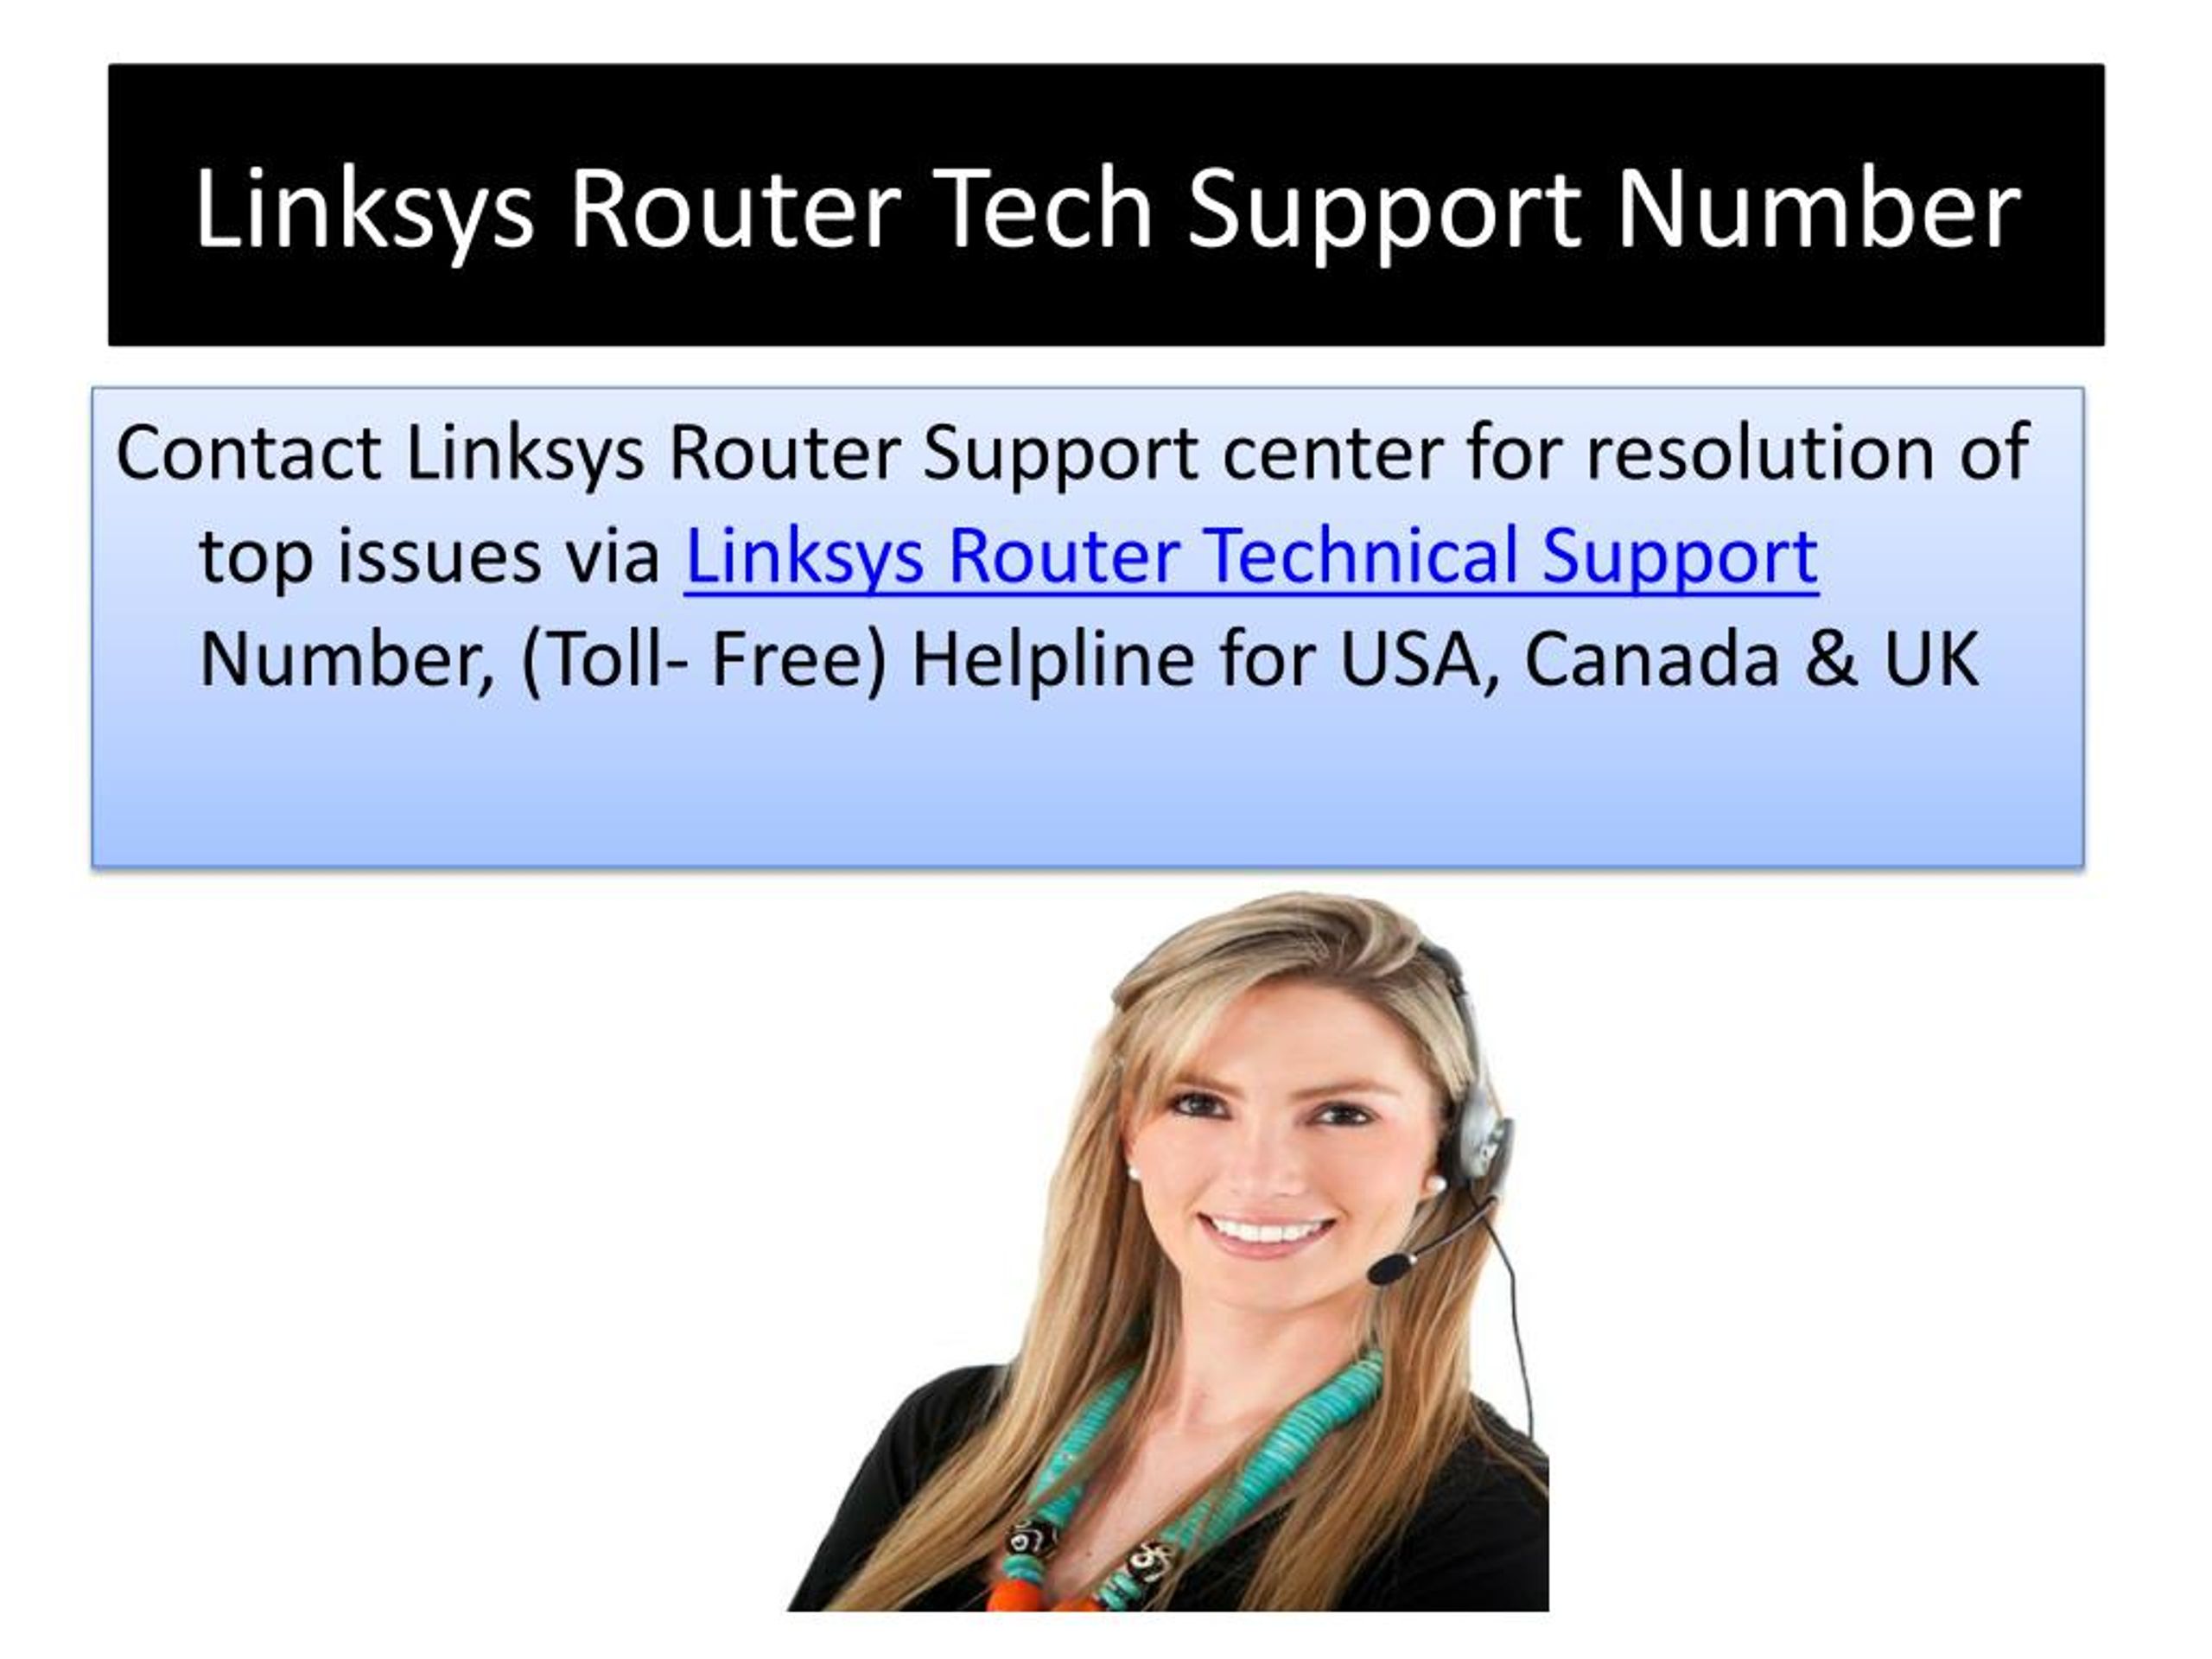 linksys contact toll free number